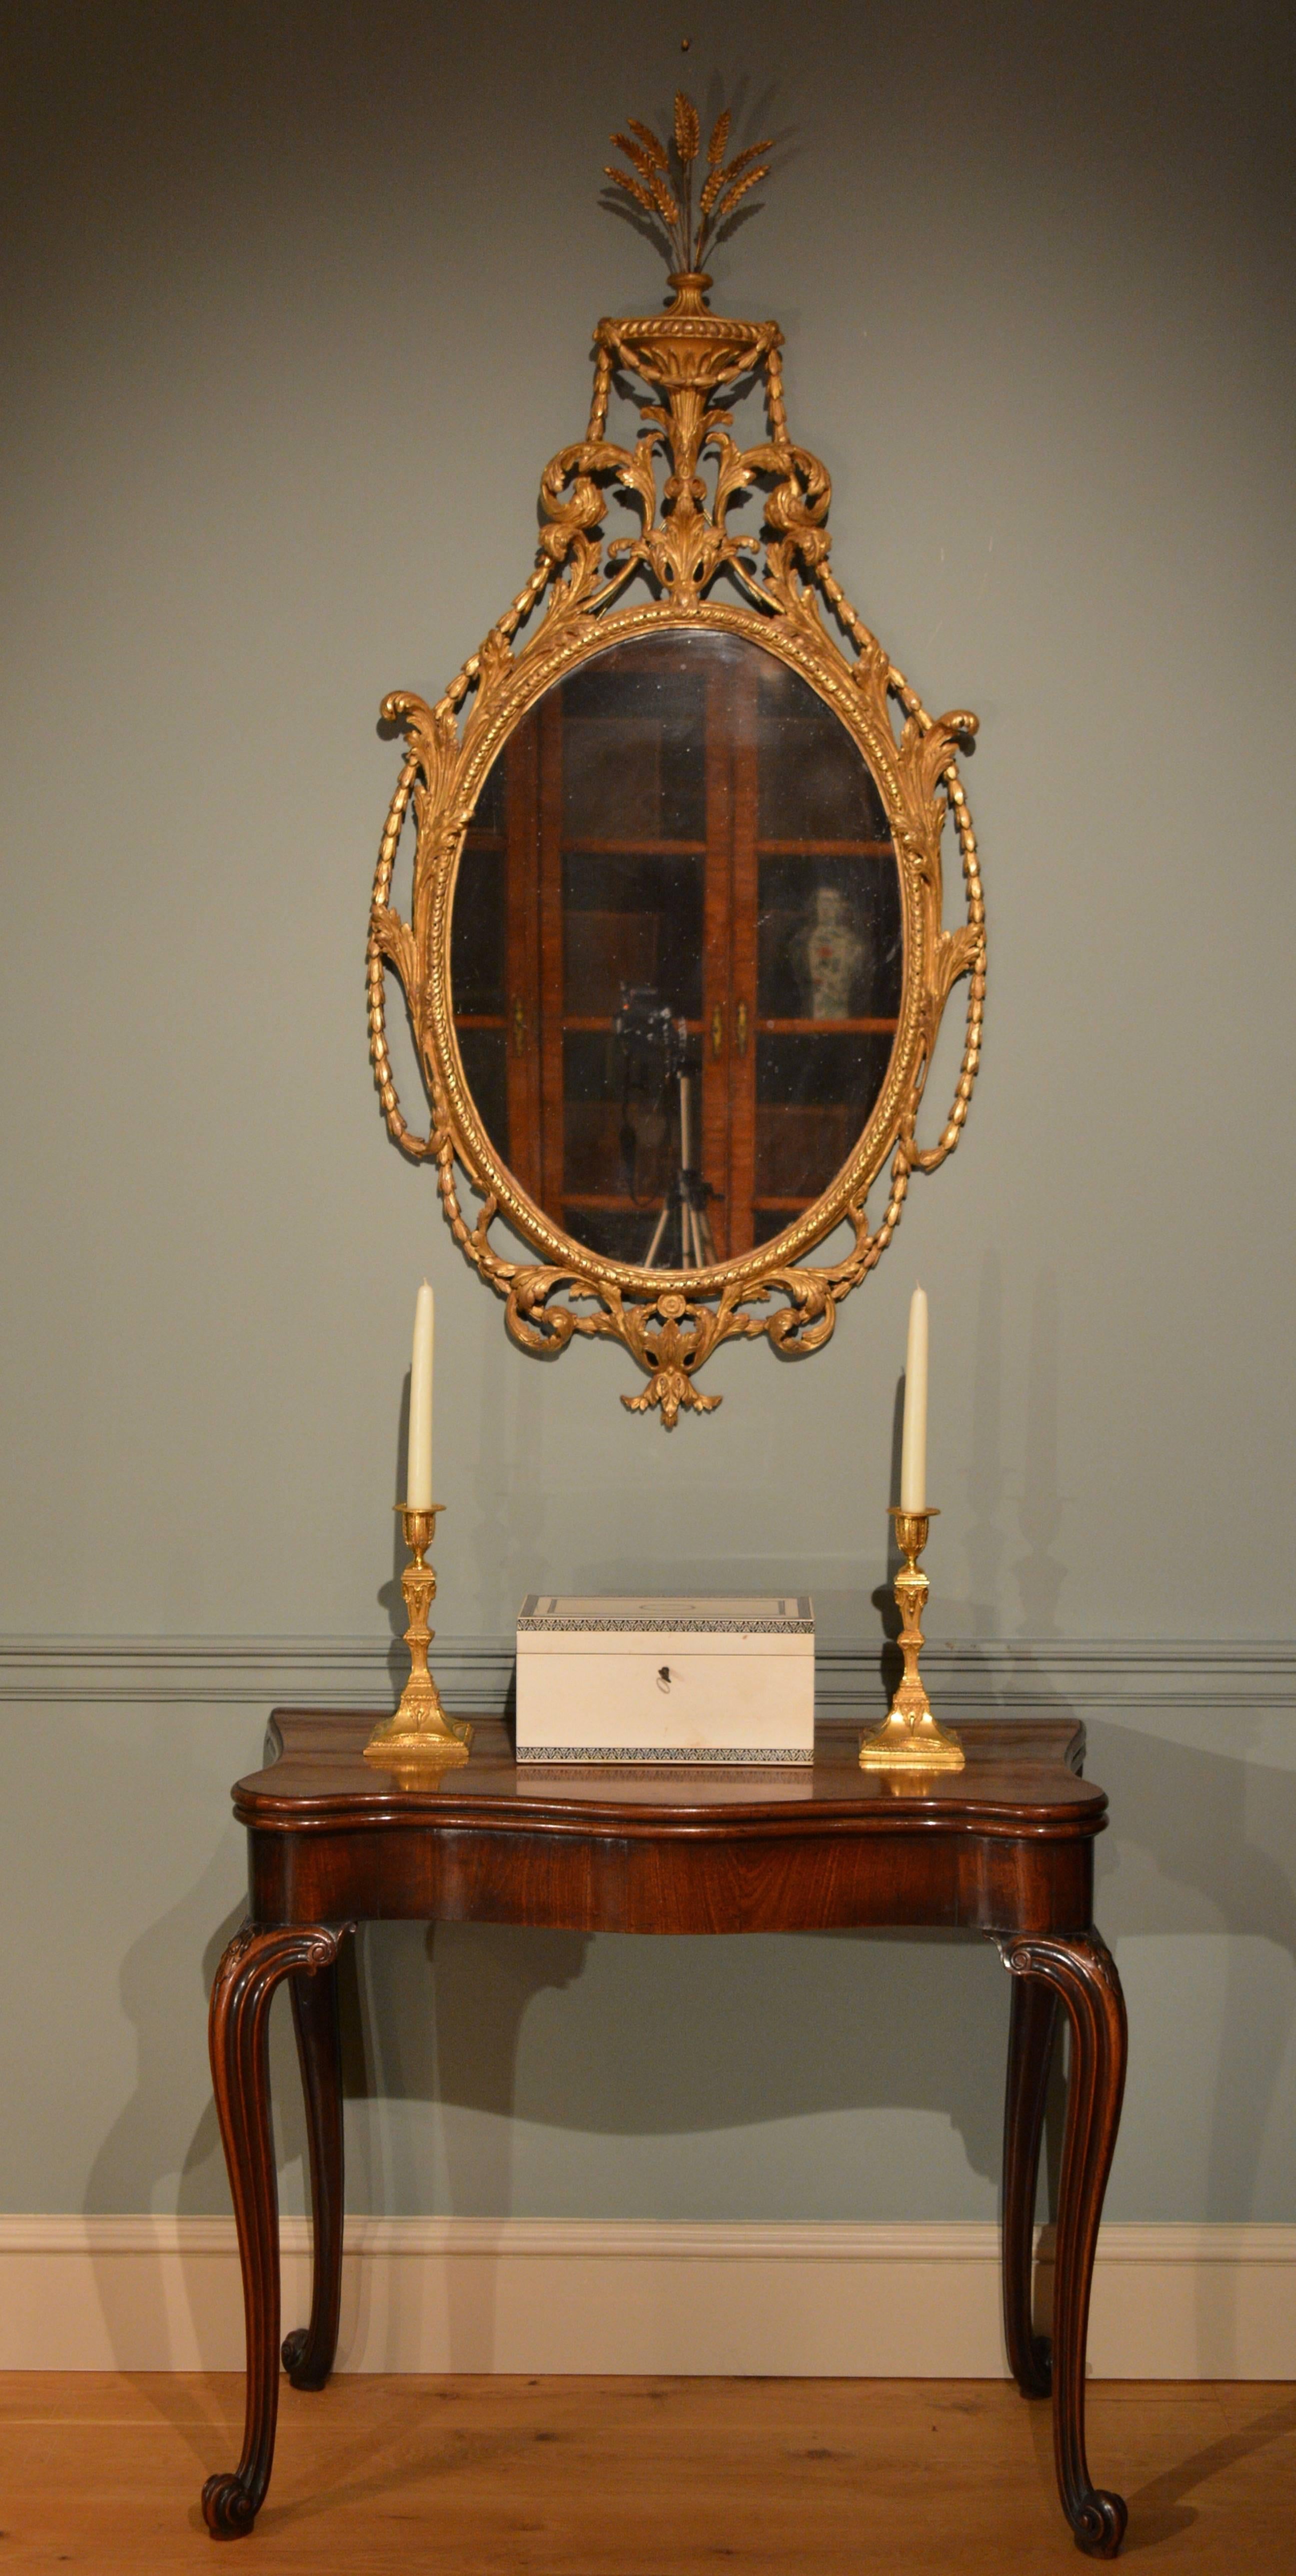 A fine carved wood neoclassical mirror, the oval plate surmounted by an urn sprouting corn below which hand-carved wood swags that surround the frame, interspersed with scrolling acanthus.